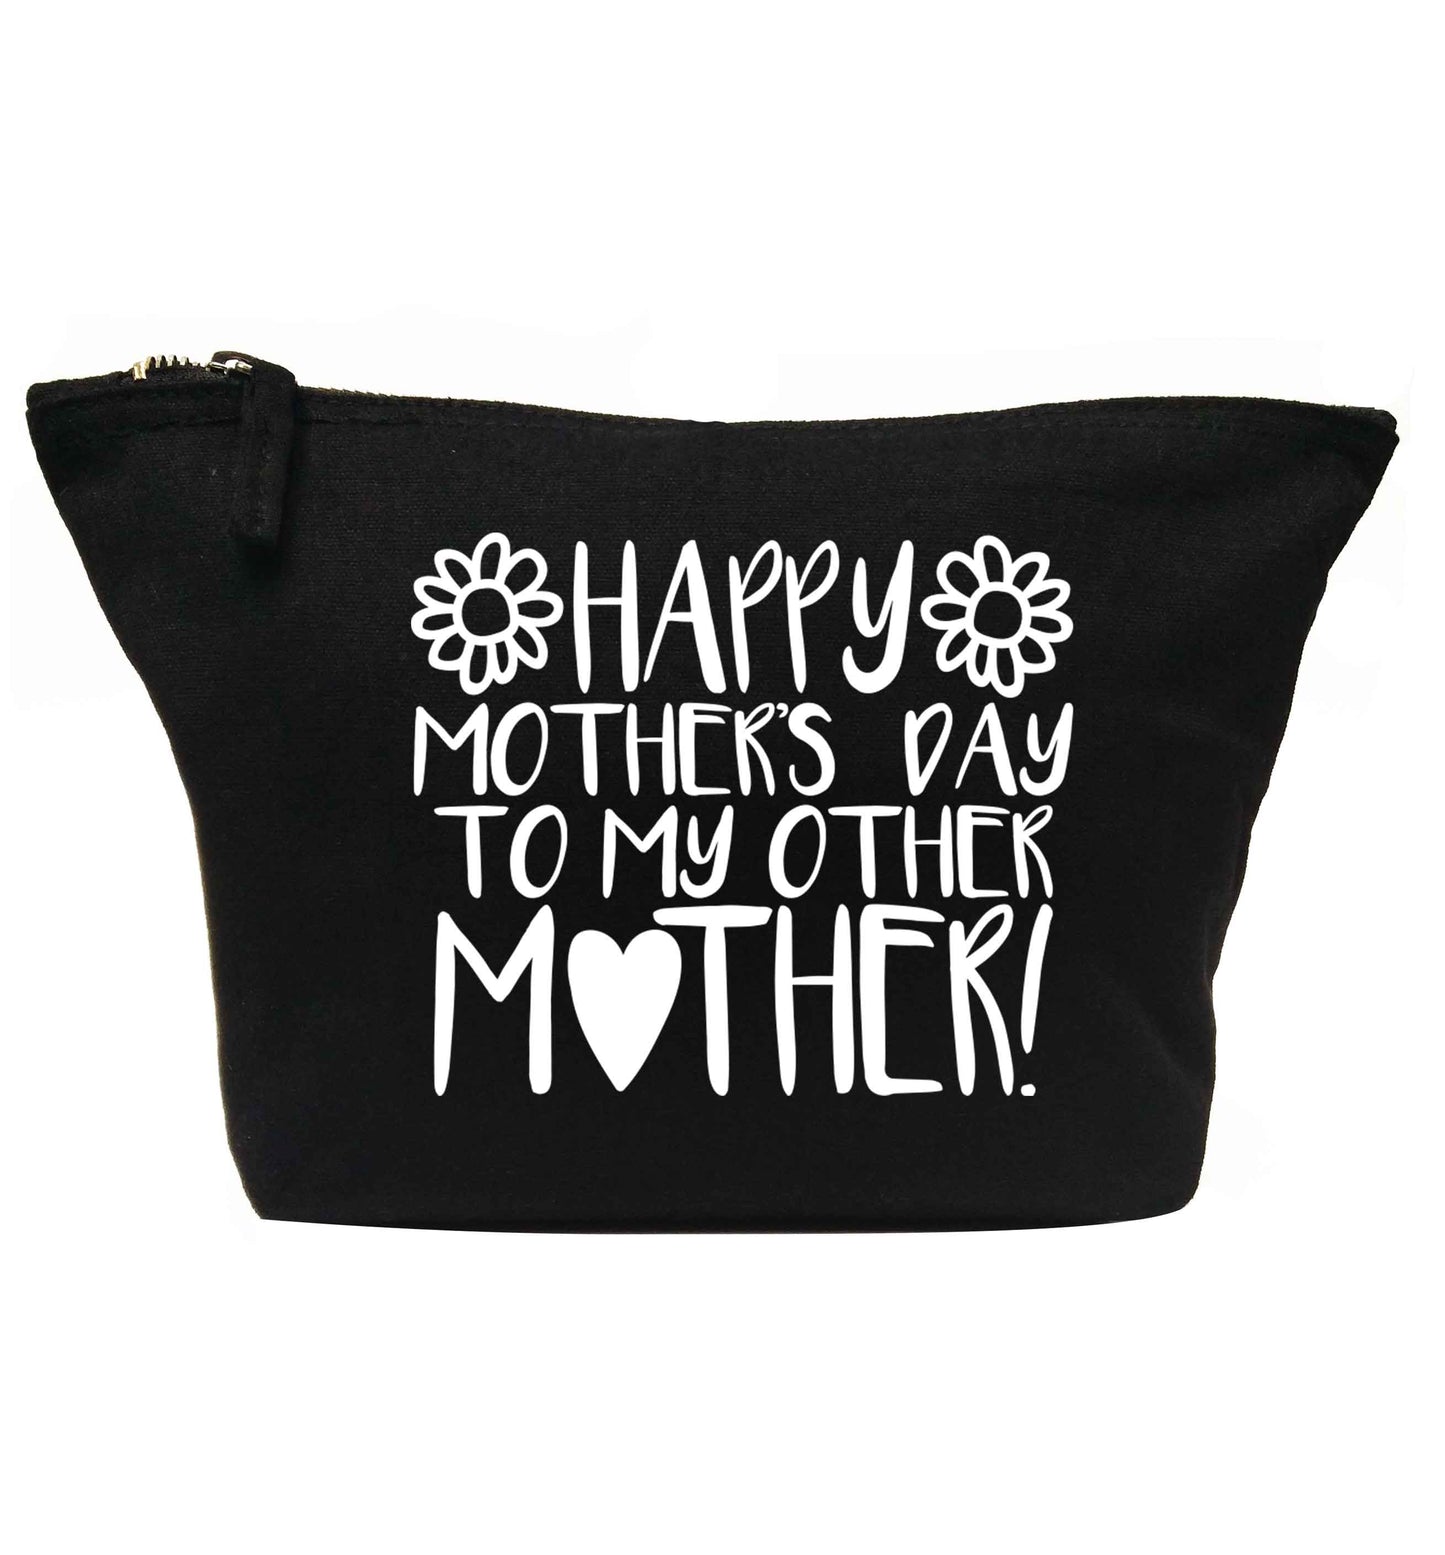 Happy mother's day to my other mother | Makeup / wash bag